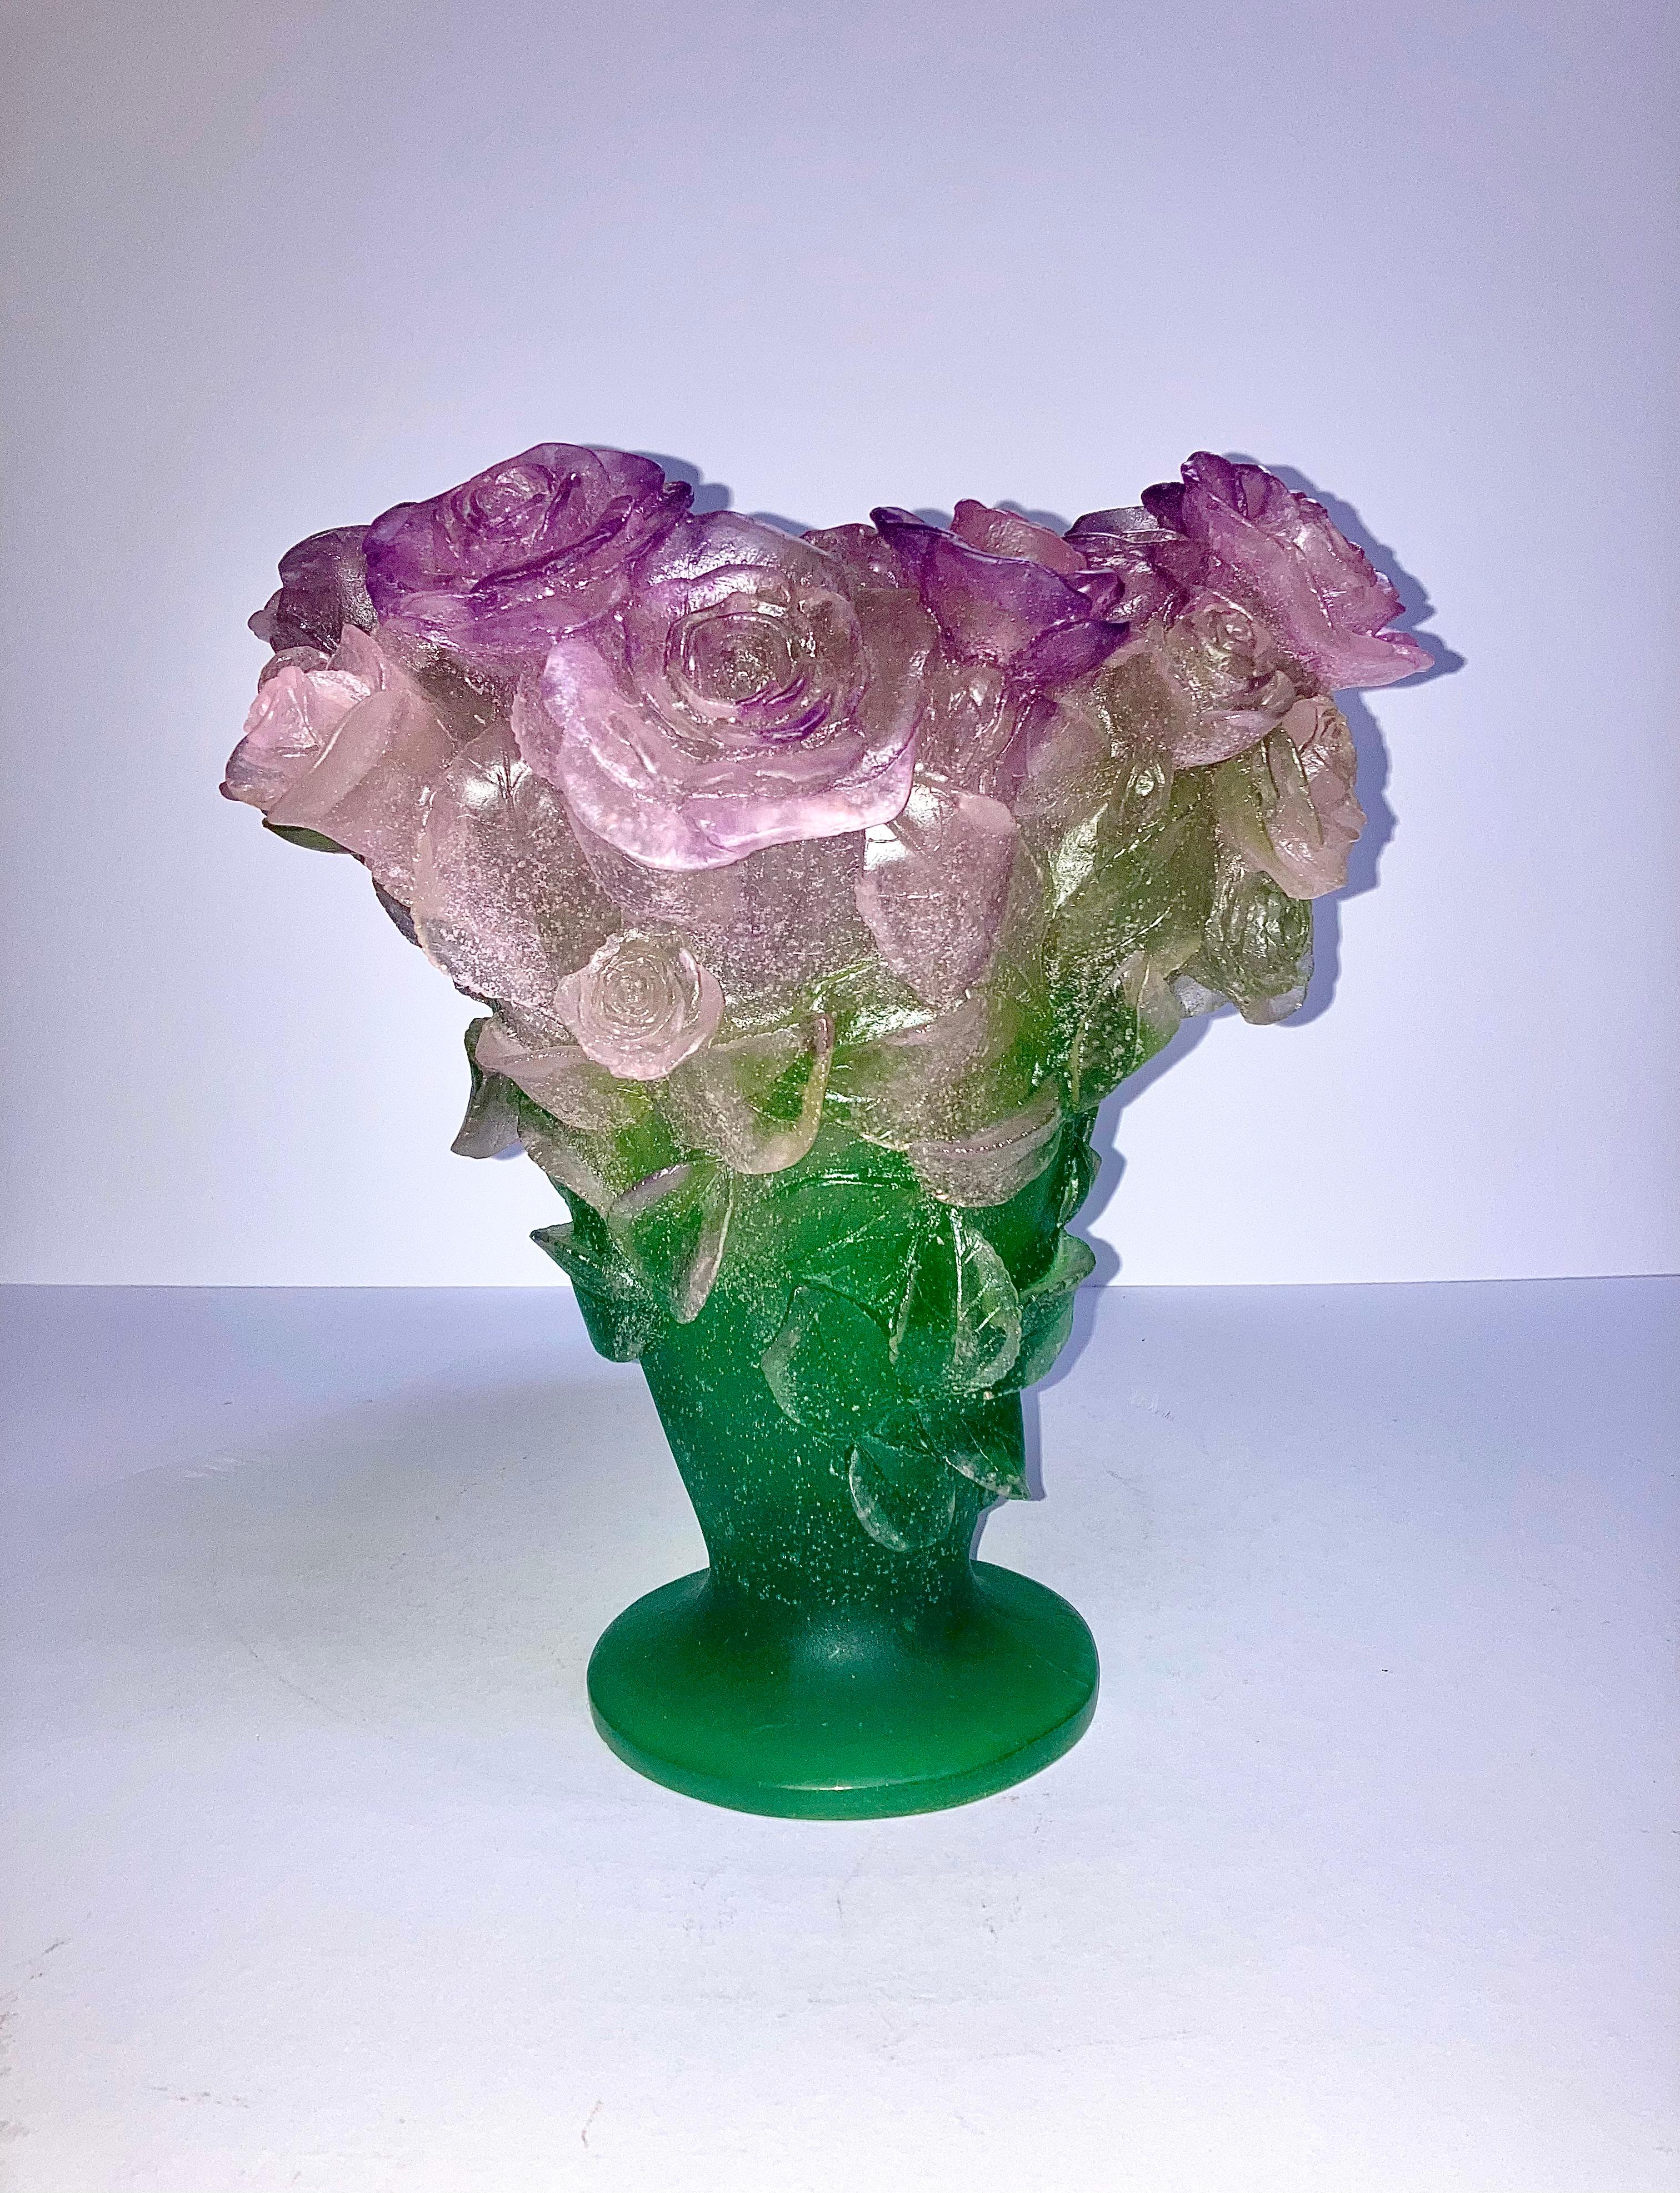 This is an flaring form, molded with roses in pink shading to green, signed. Height 12 inches. Excellent condition

